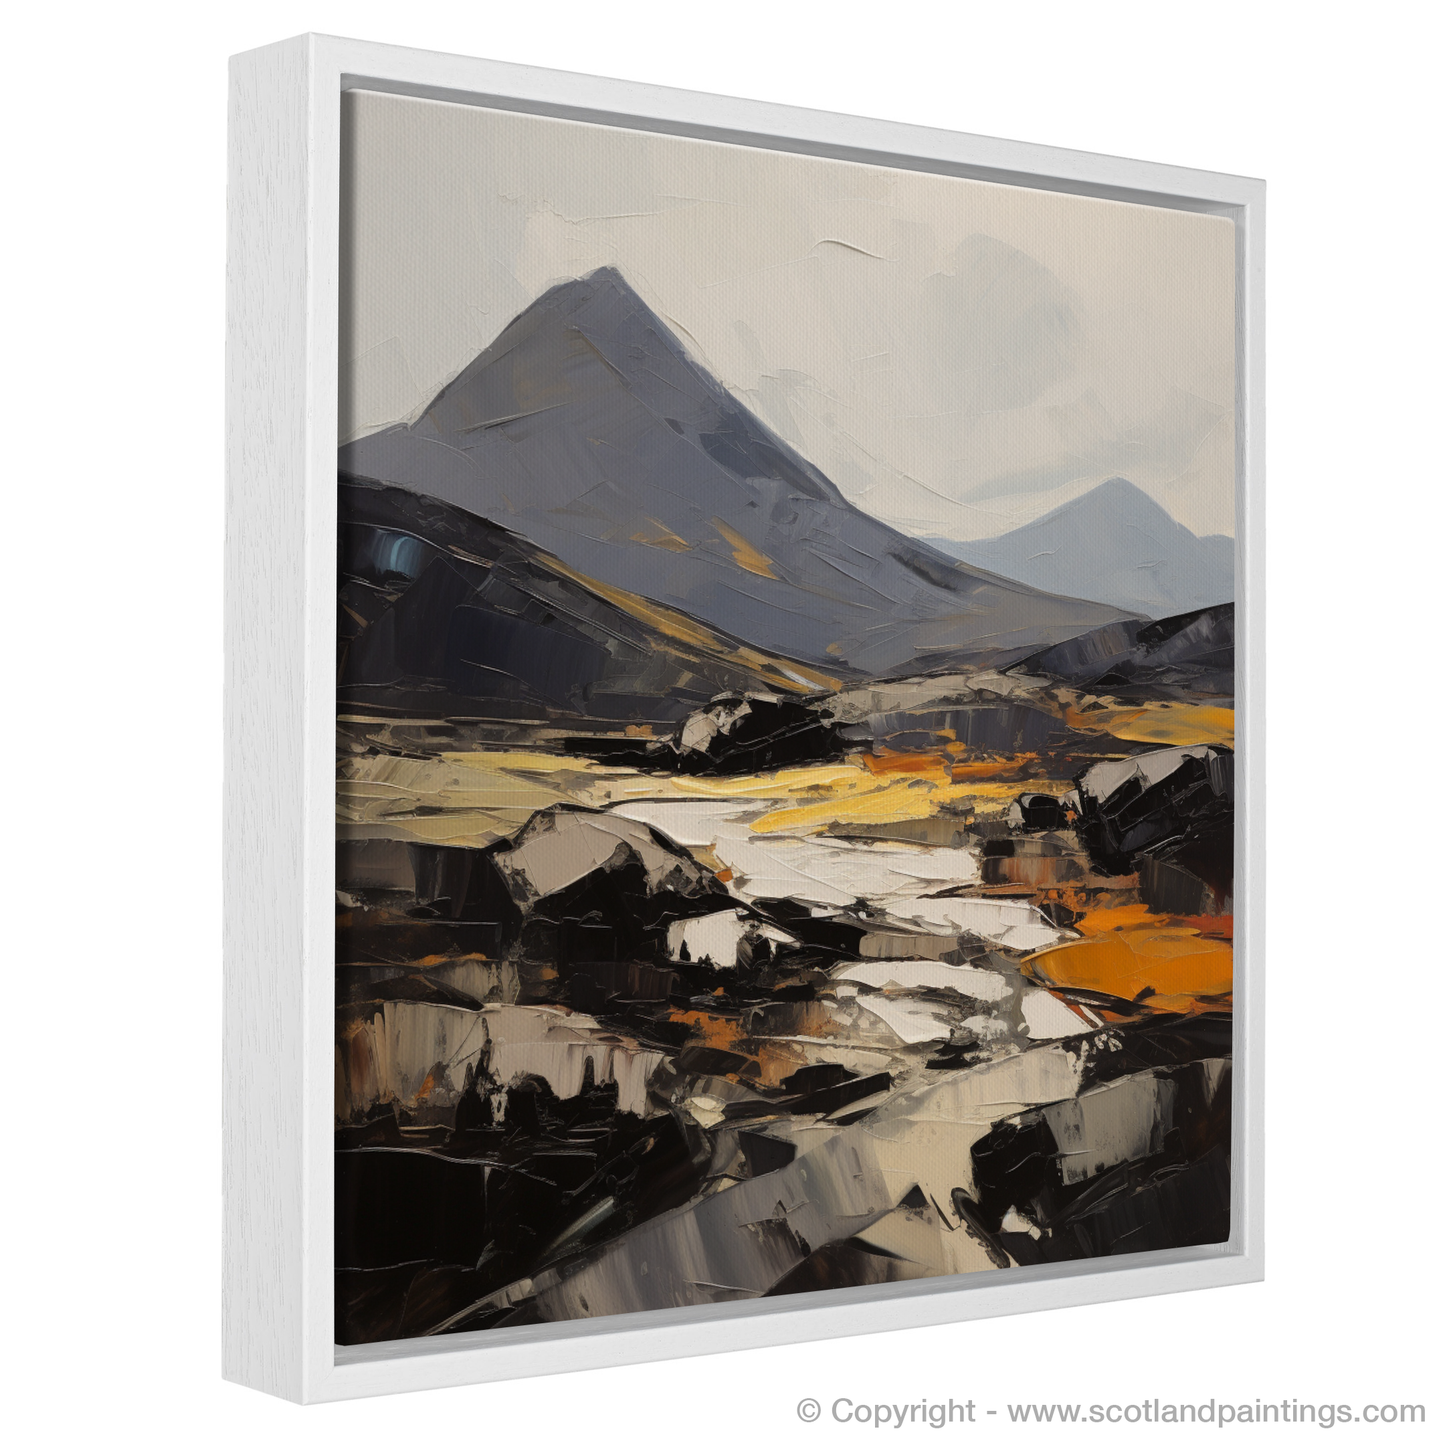 Painting and Art Print of Ben More, Isle of Mull entitled "Majestic Ben More: An Expressionist Ode to Scotland's Highlands".